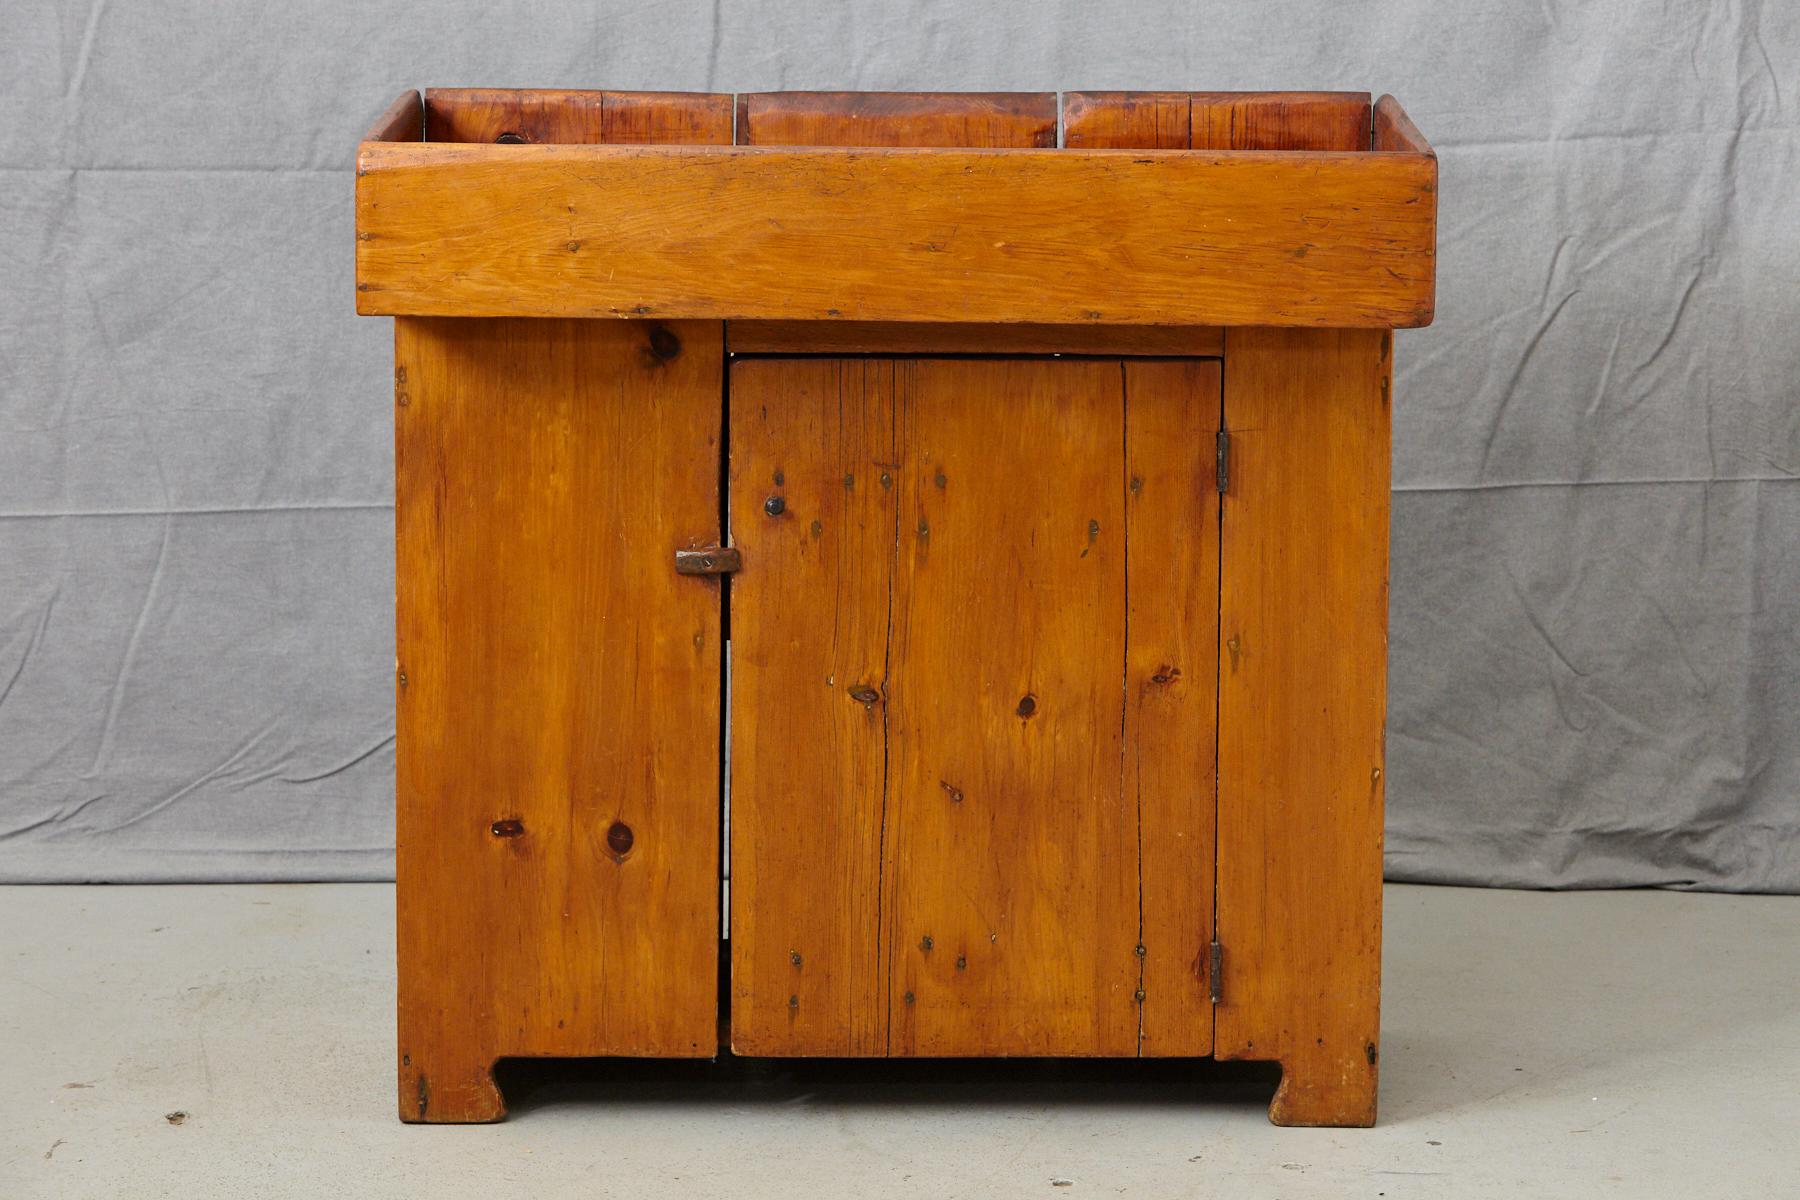 19th century antique American primitive pine dry sink. Solid and sturdy construction with a beautiful patina, one font door and one shelf, puristic, minimal hardware.
Works perfectly as a bar with a large surface and a high edge.
Measures: Depth